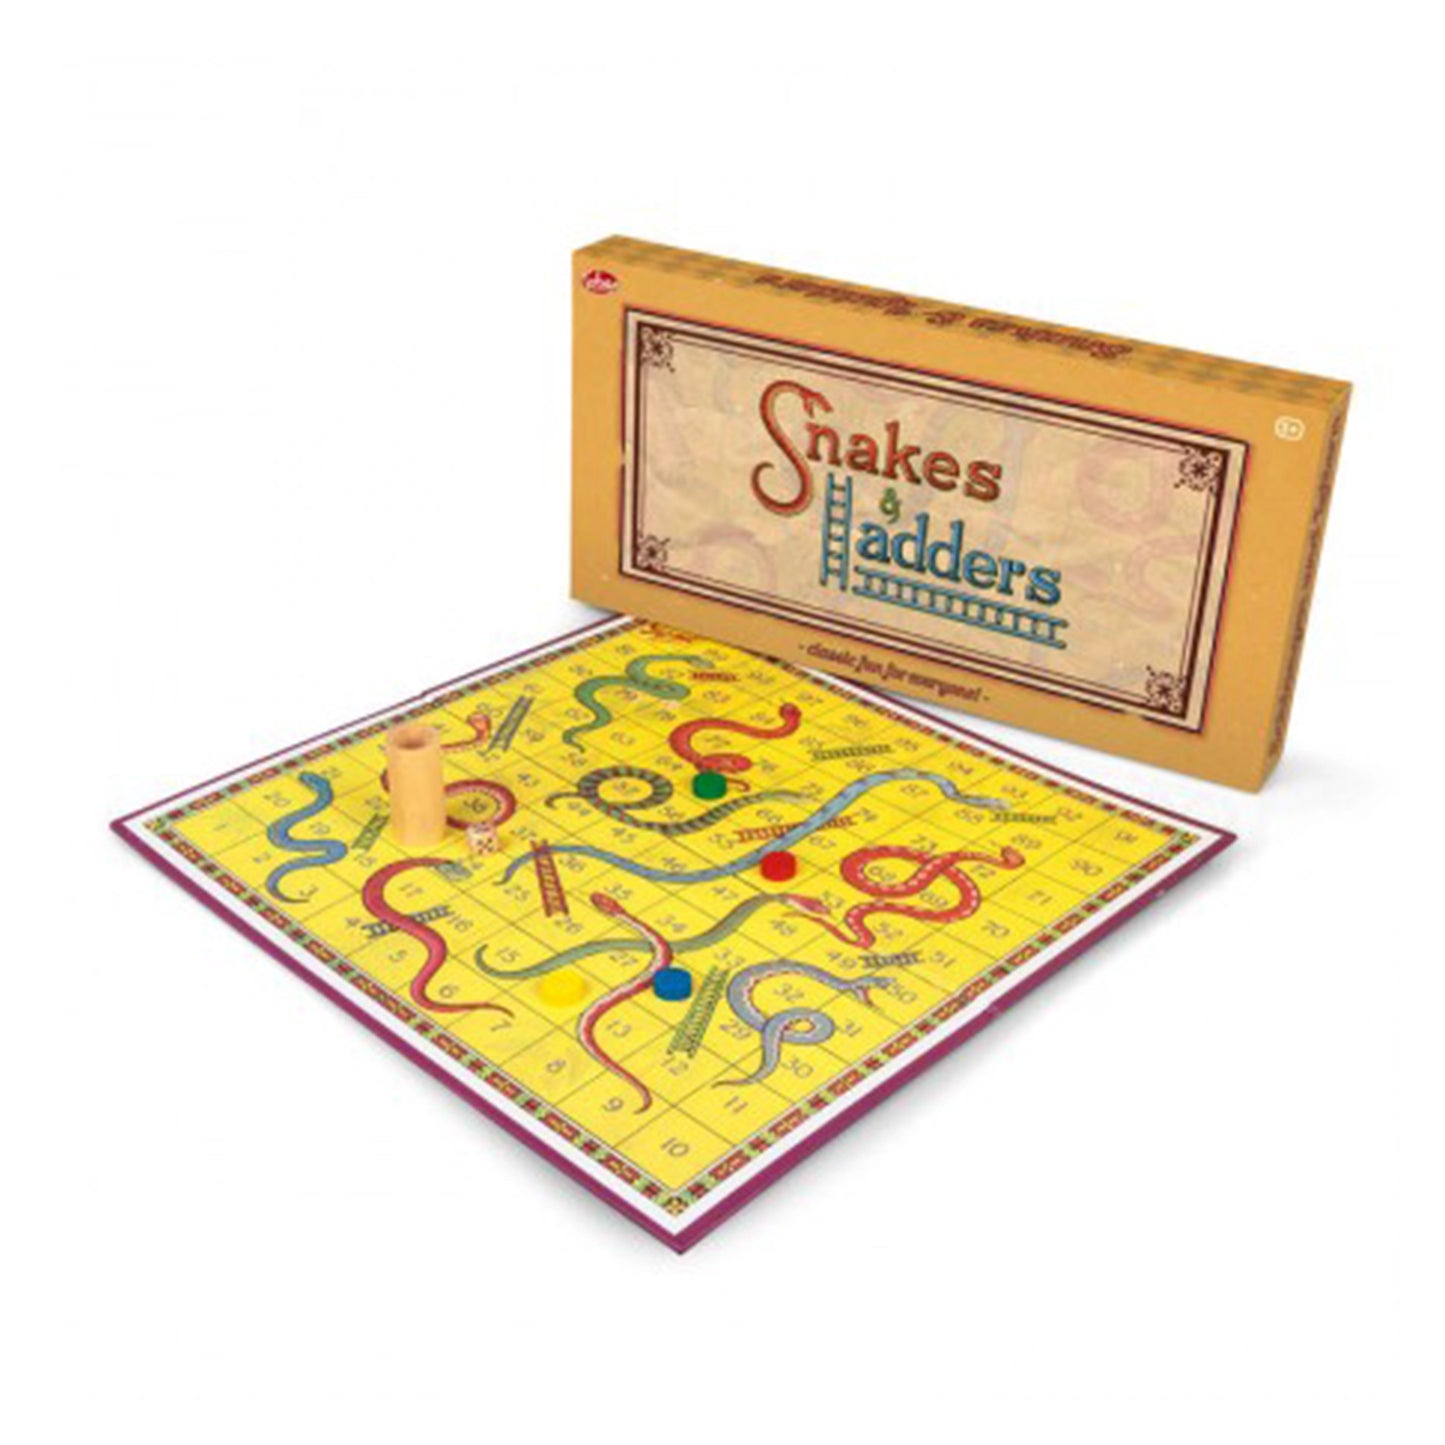 Snakes & Ladders Game - Tobar - The Forgotten Toy Shop